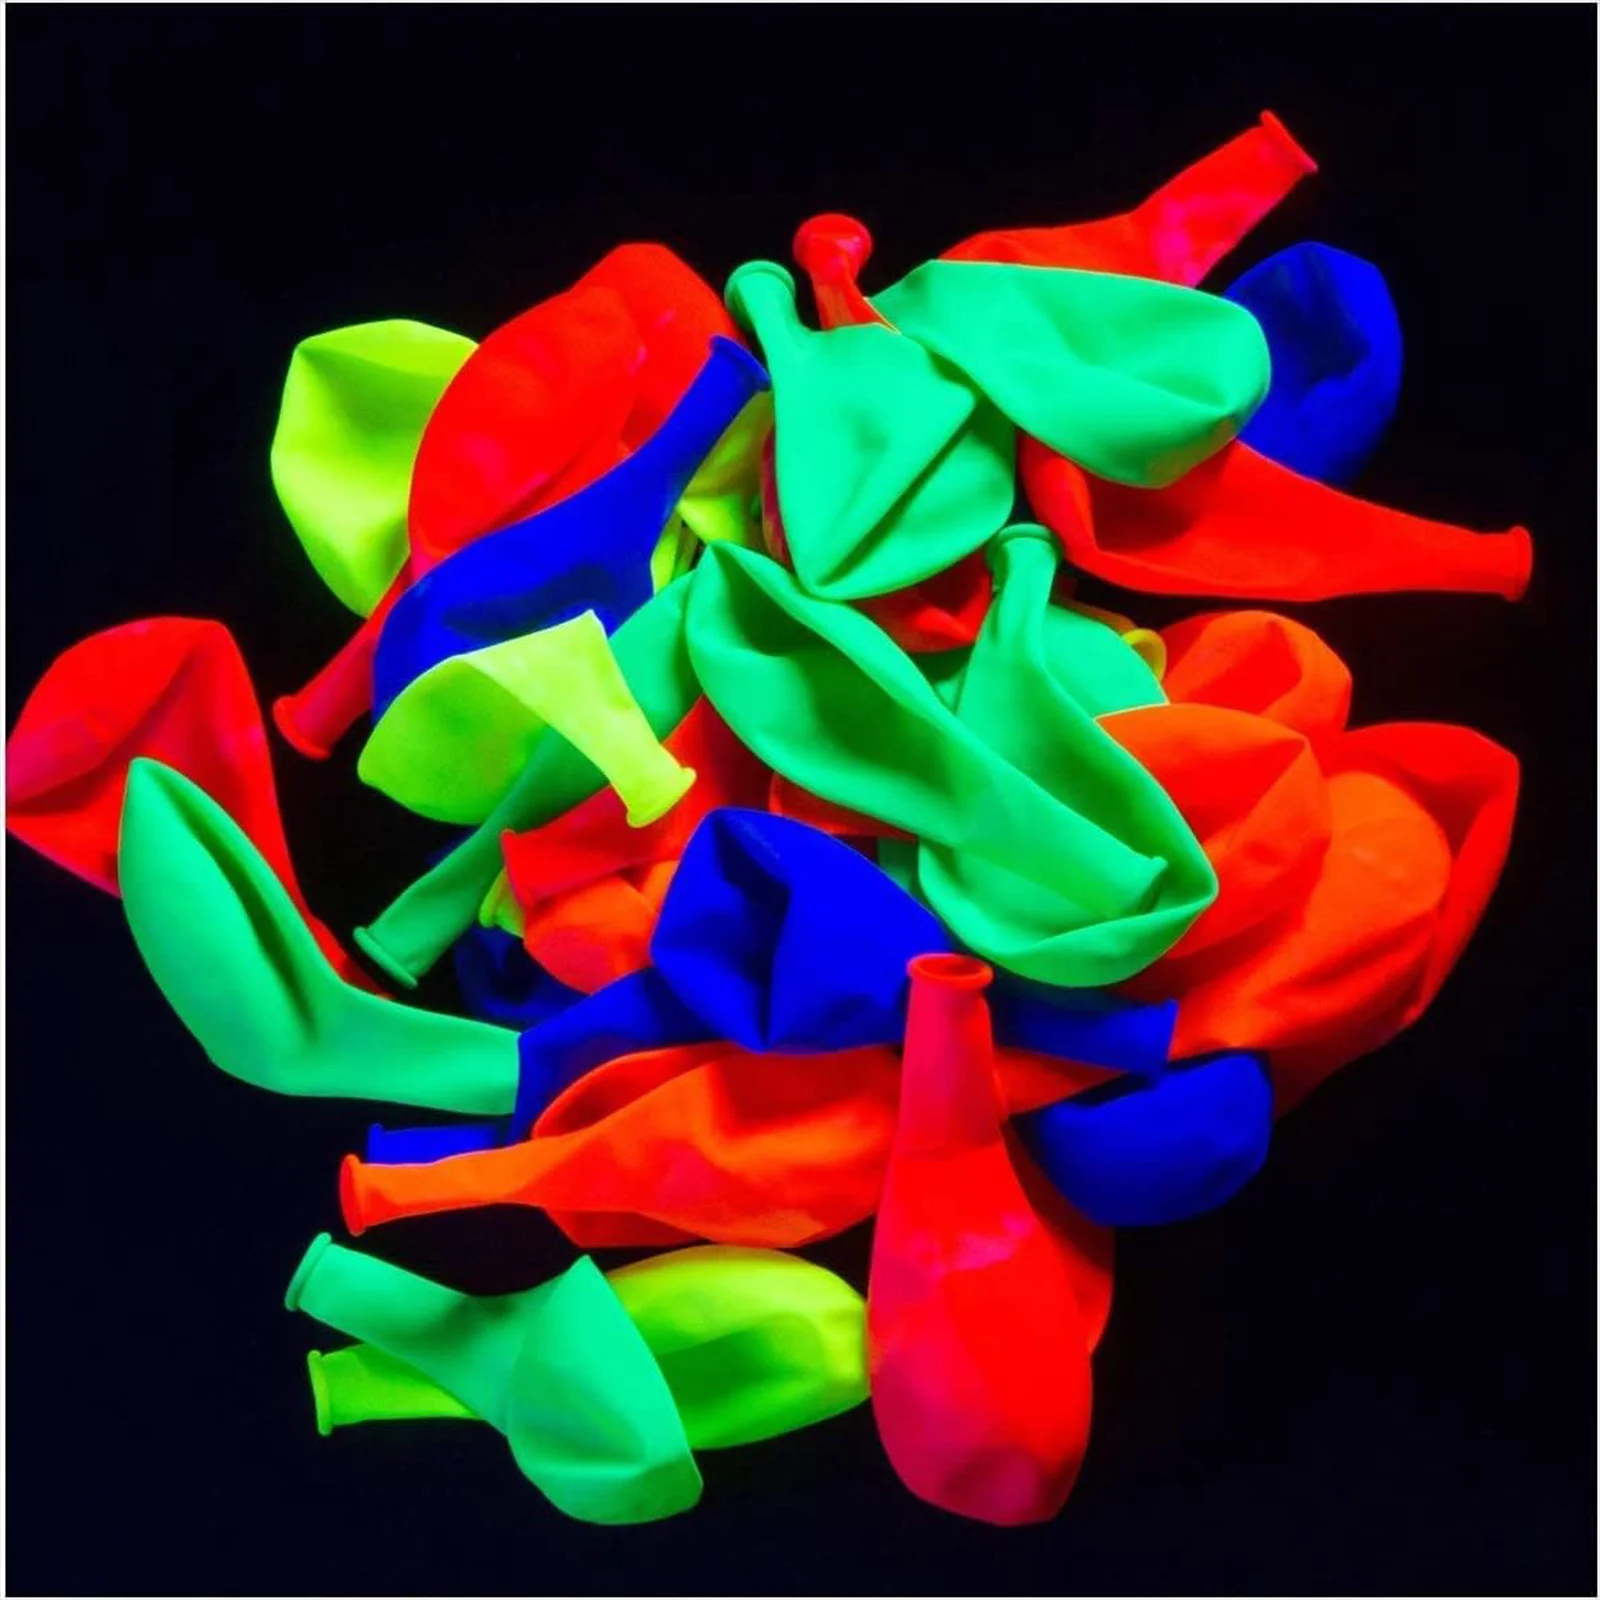 

30pcs Neon Glow In The Dark Latex Balloons in Multiple Colors Fun UV Fluorescent Party Luminous Ballons for Birthday Decoration